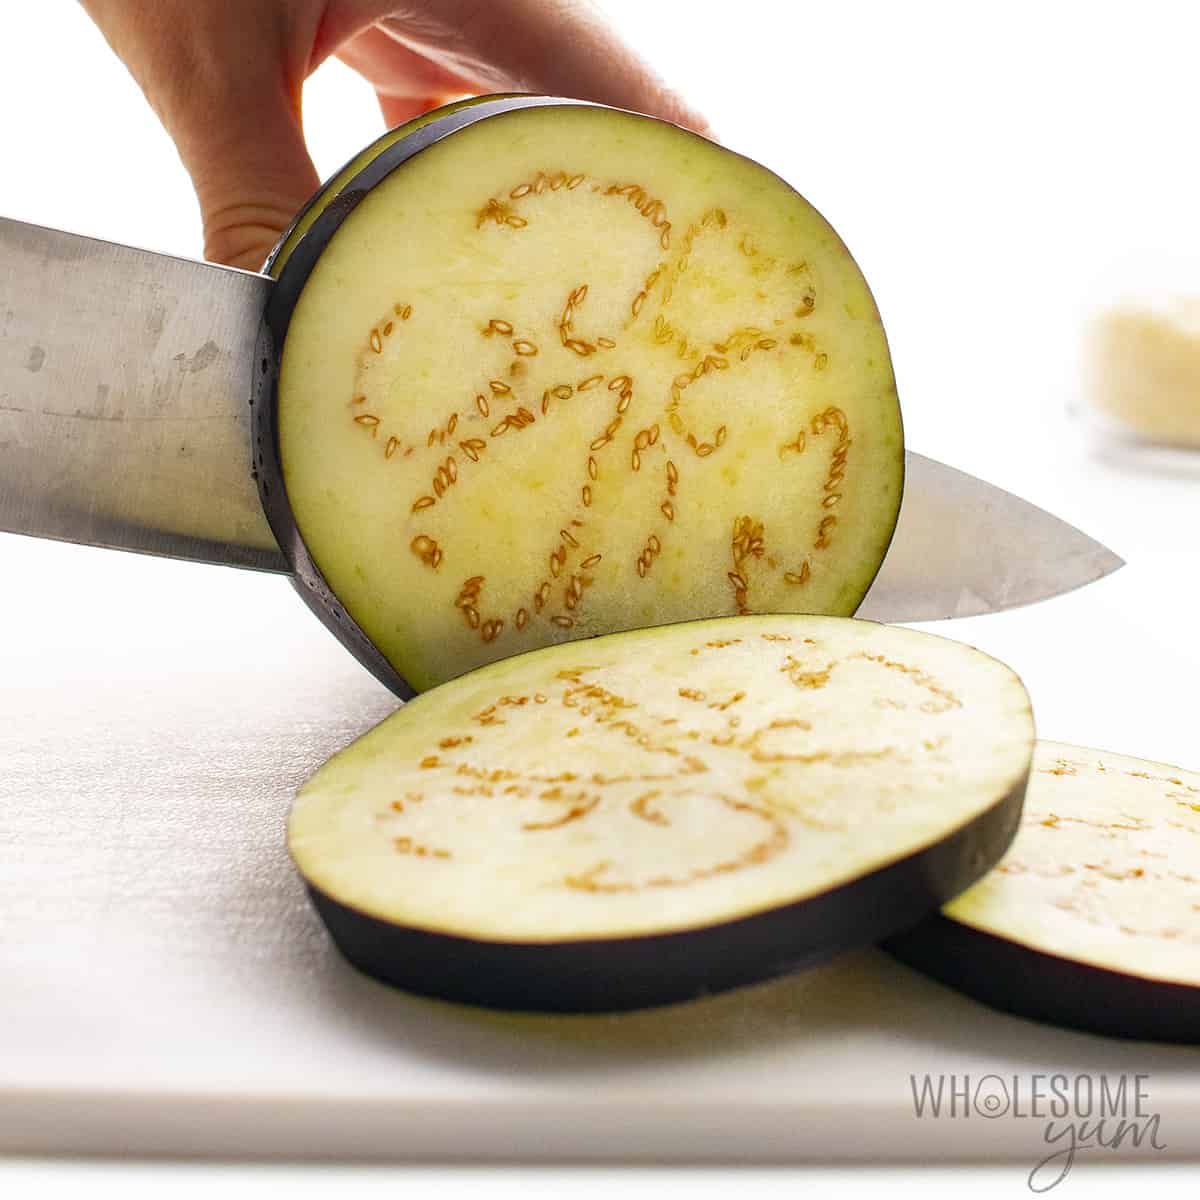 Knife cutting slices of eggplant